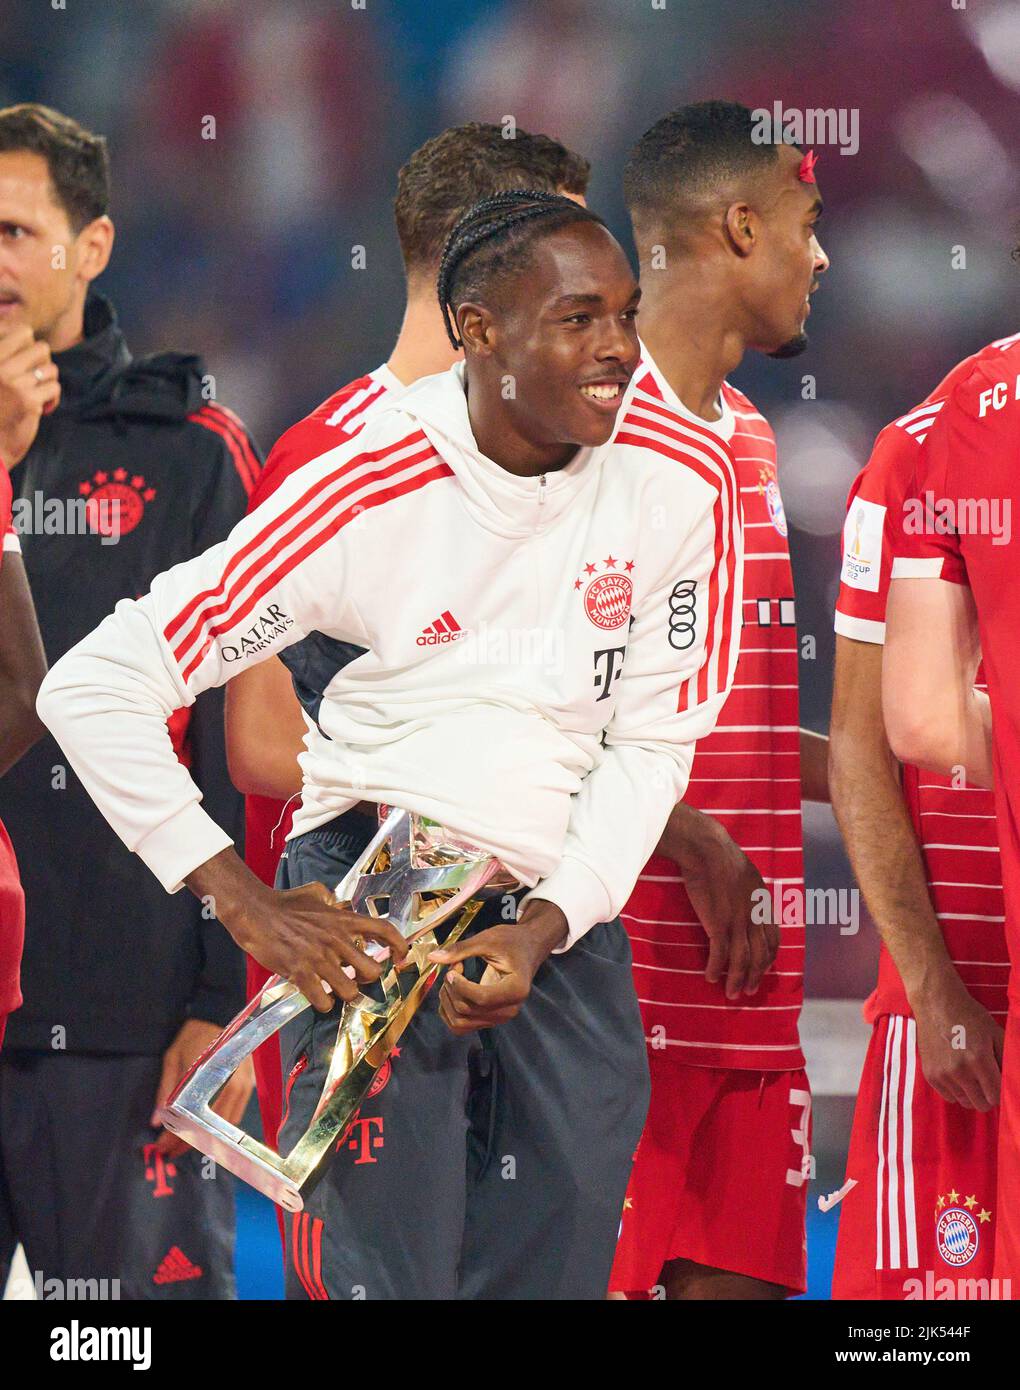 Leipzig, Germany. 30th July, 2022. with trophy in the match RB LEIPZIG - FC BAYERN MÜNCHEN DFL SUPERCUP, 1. German Football League,  on Leipzig, July 30, 2022  Season 2022/2023 © Peter Schatz / Alamy Live News Credit: Peter Schatz/Alamy Live News Stock Photo